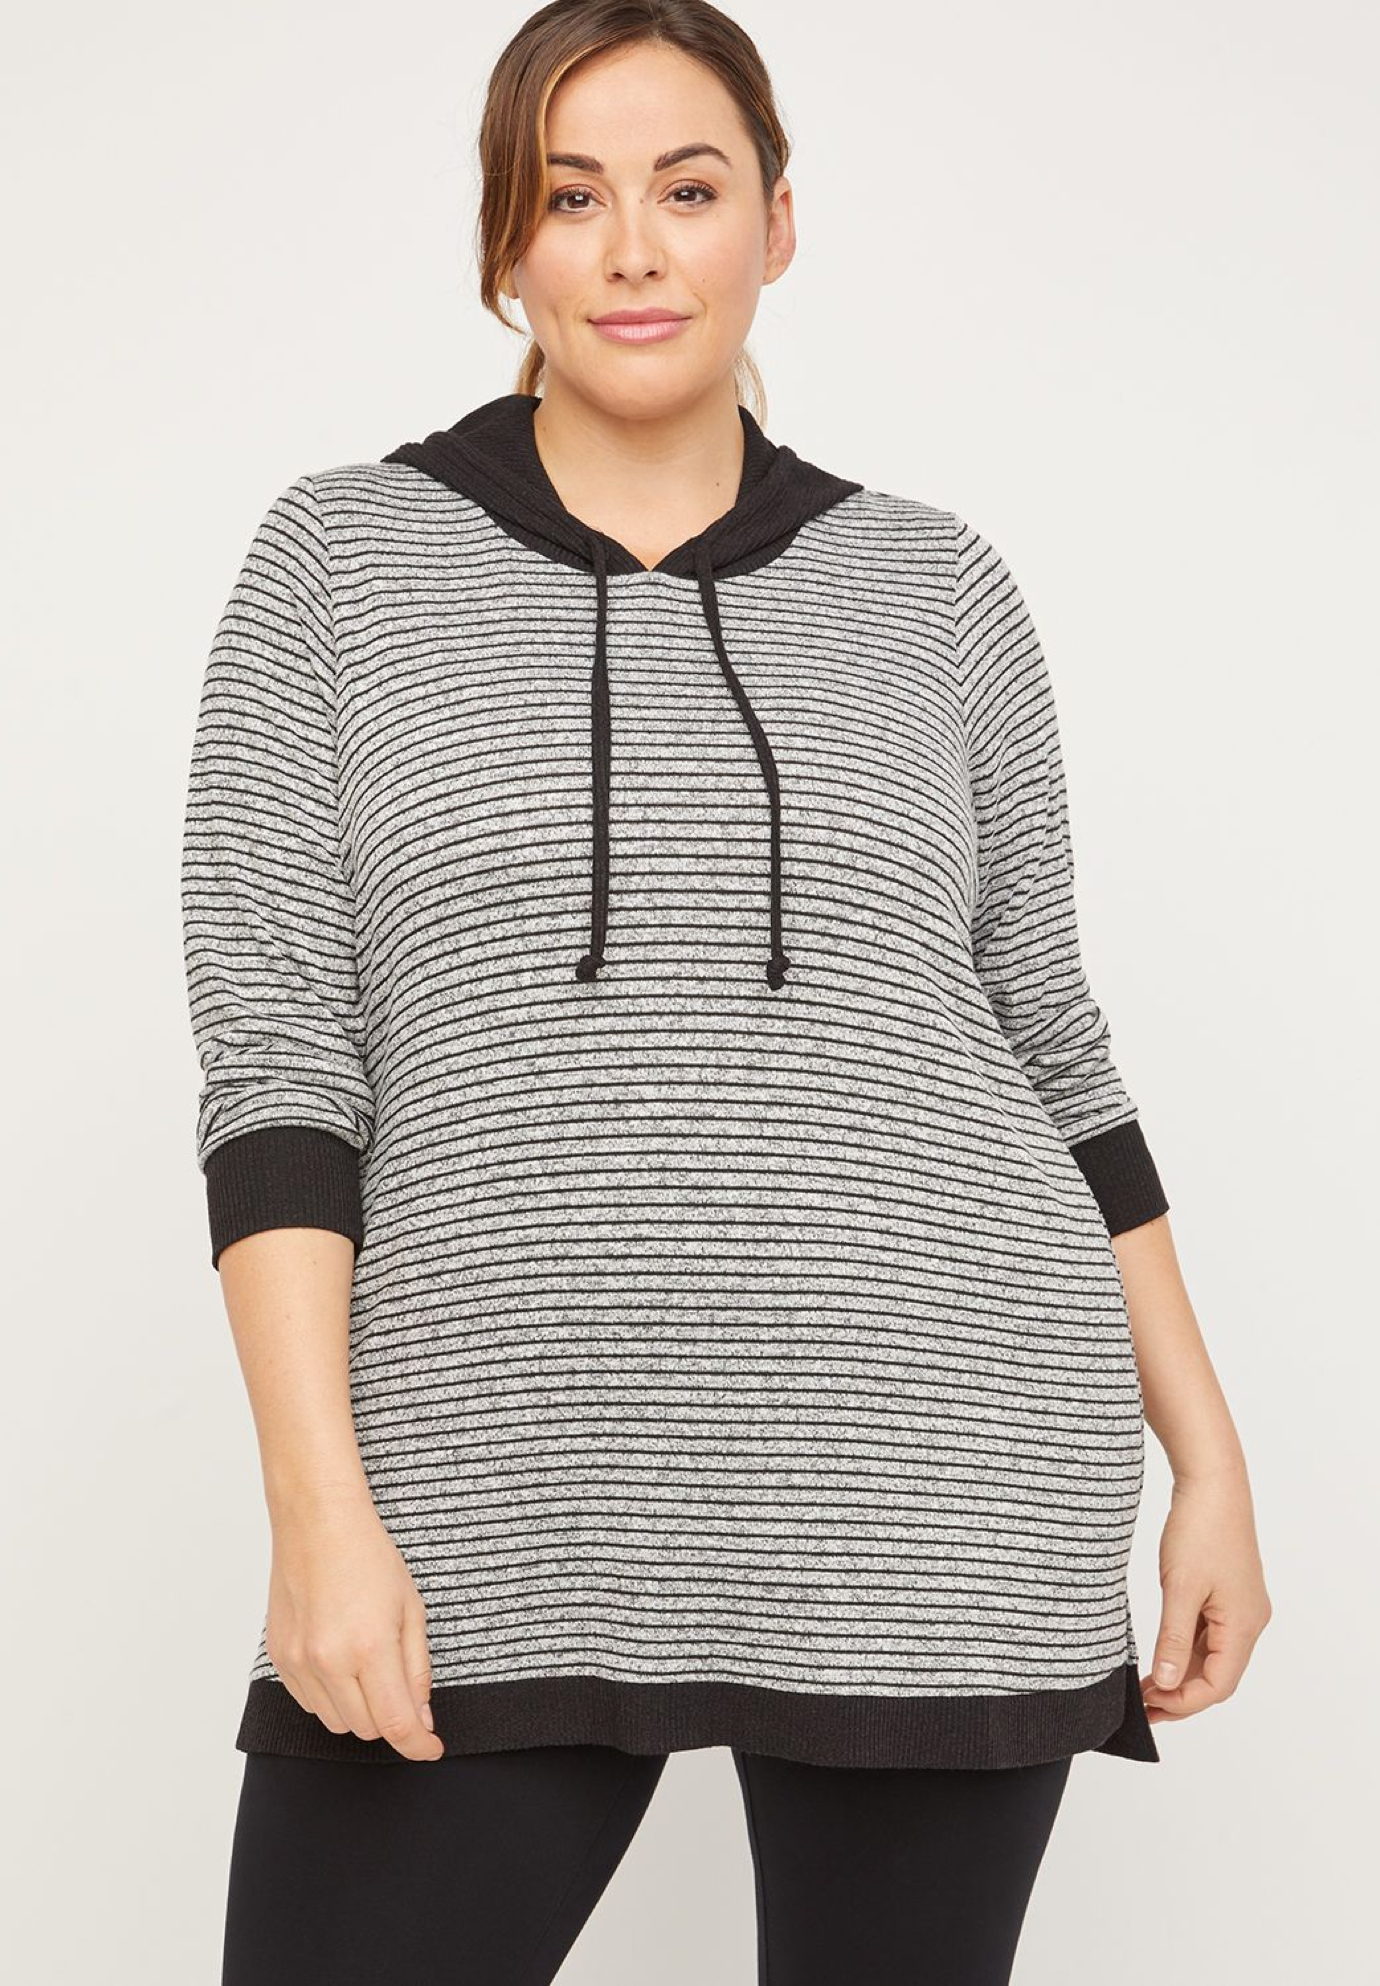 ComfySoft Striped Hooded Tunic | Fullbeauty Outlet